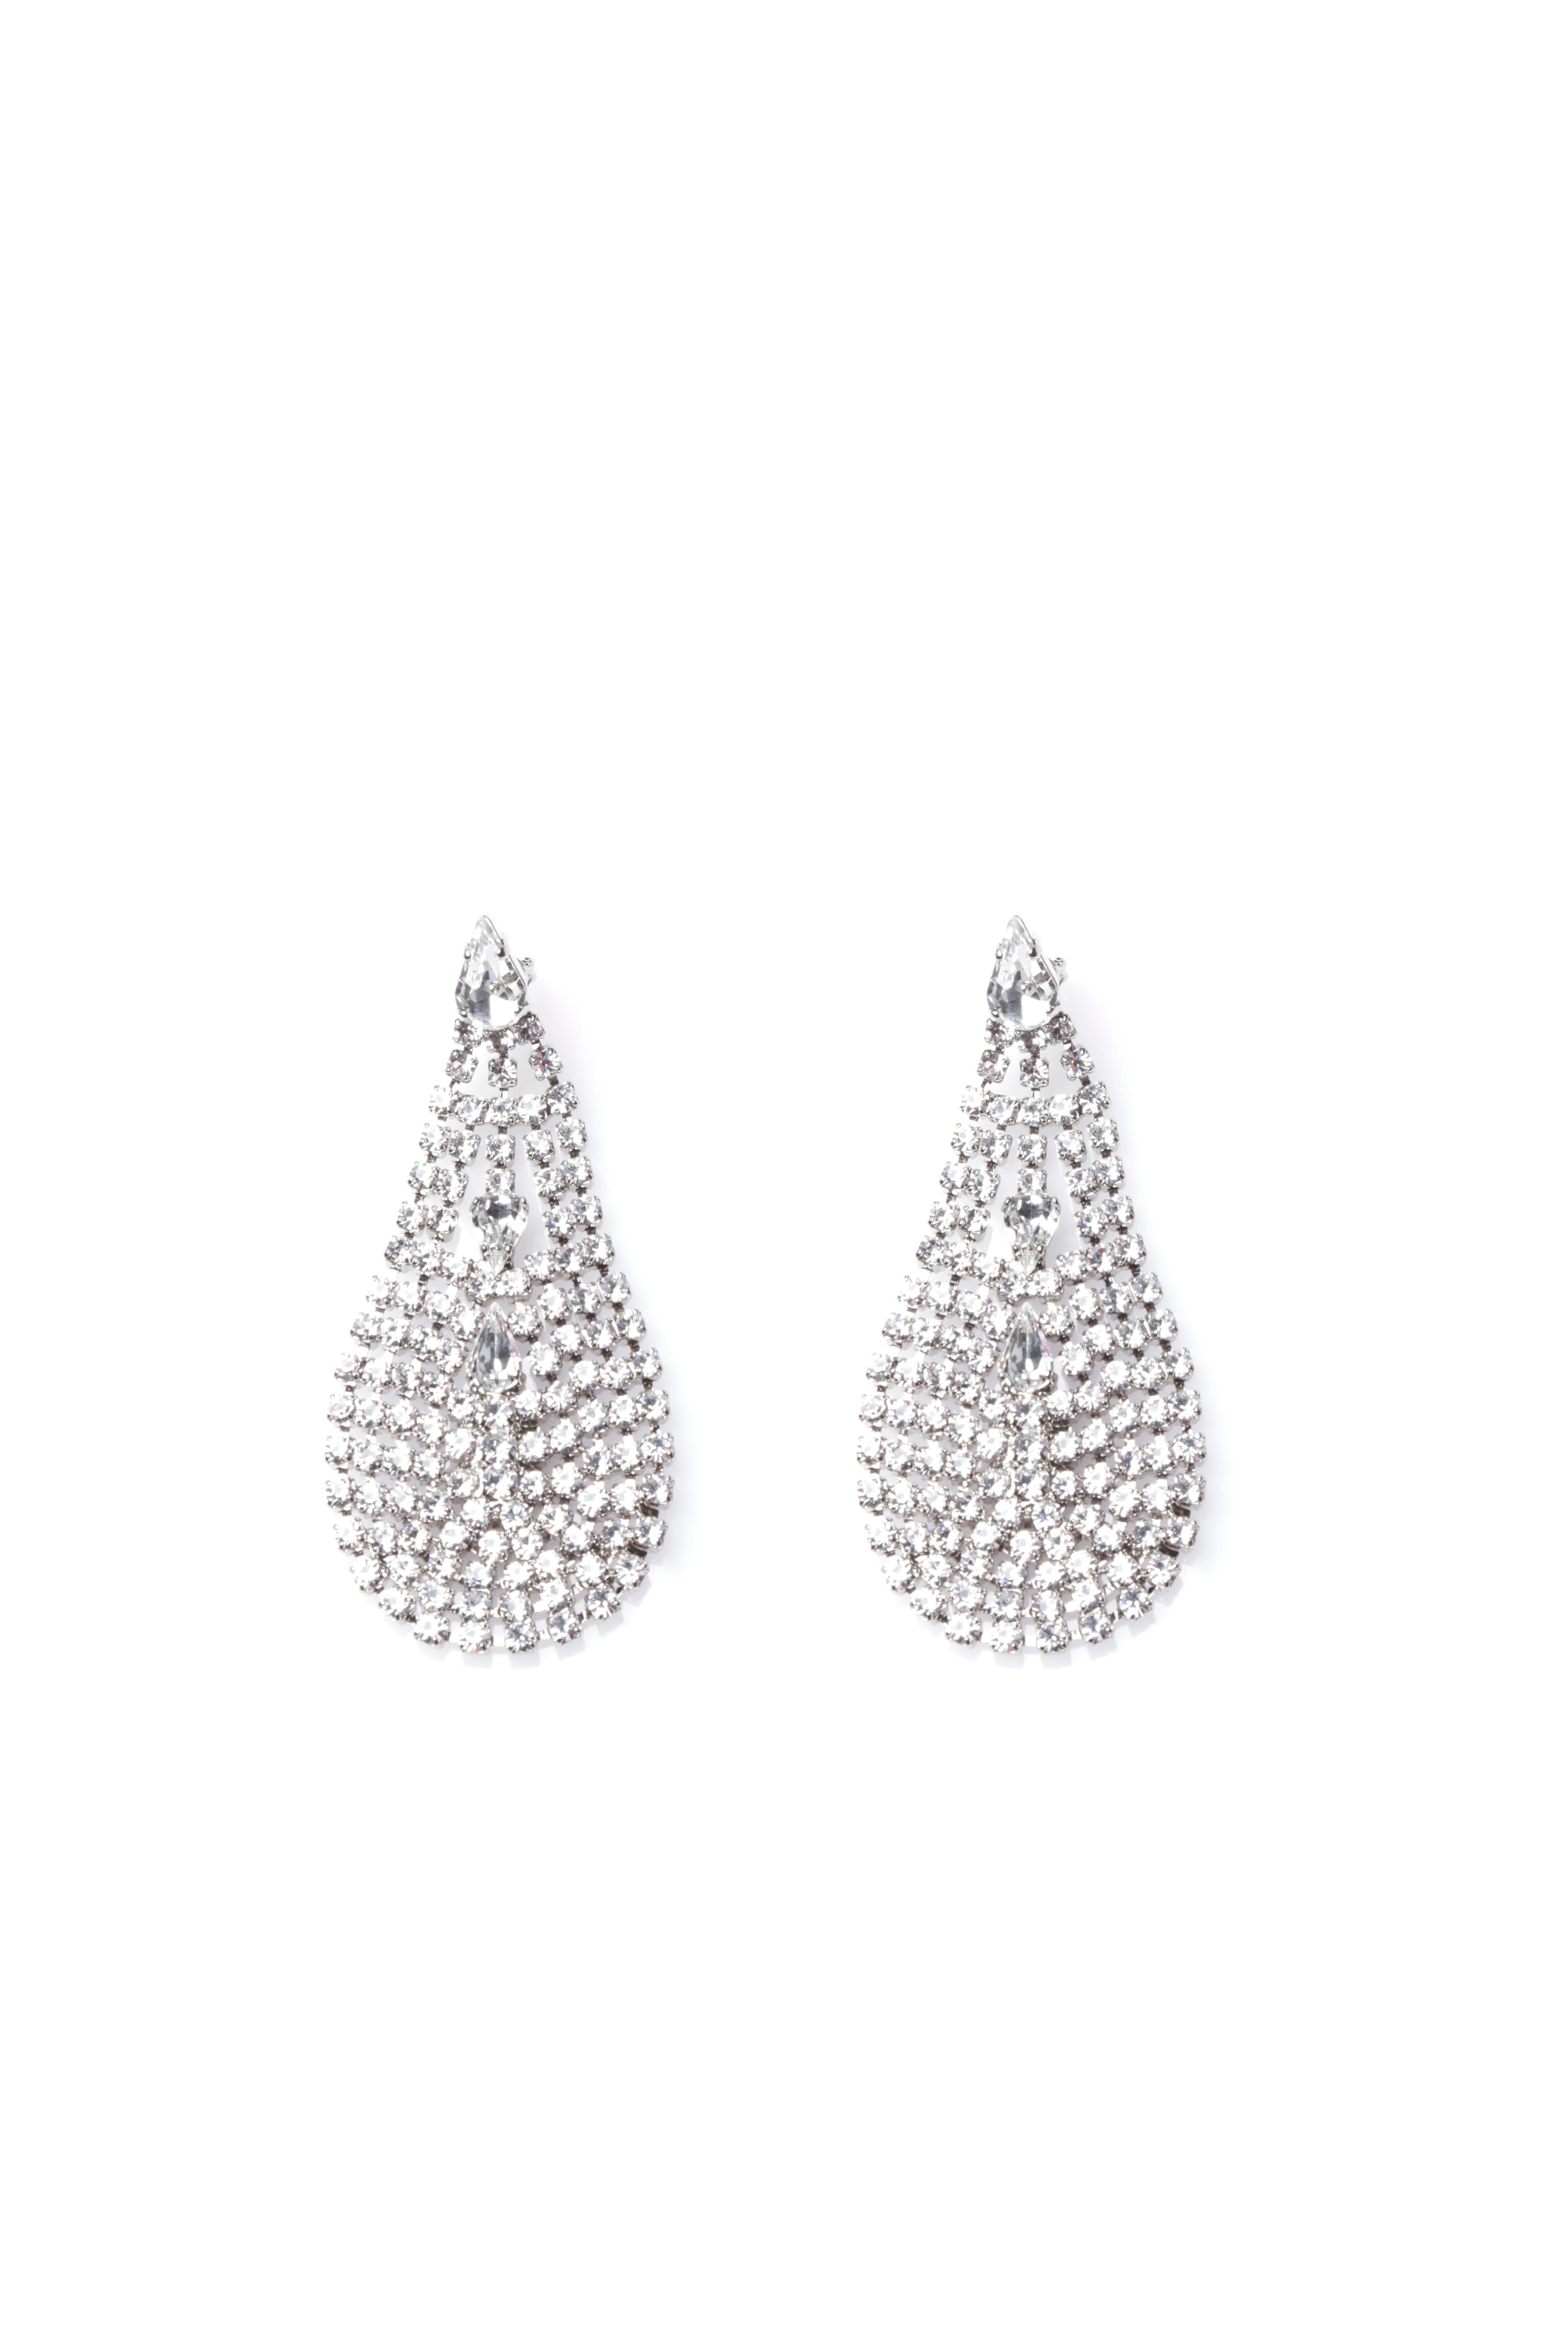 LisaC crystal swarovski pendant drops earrings
totally made in italy with real swarovski stones
